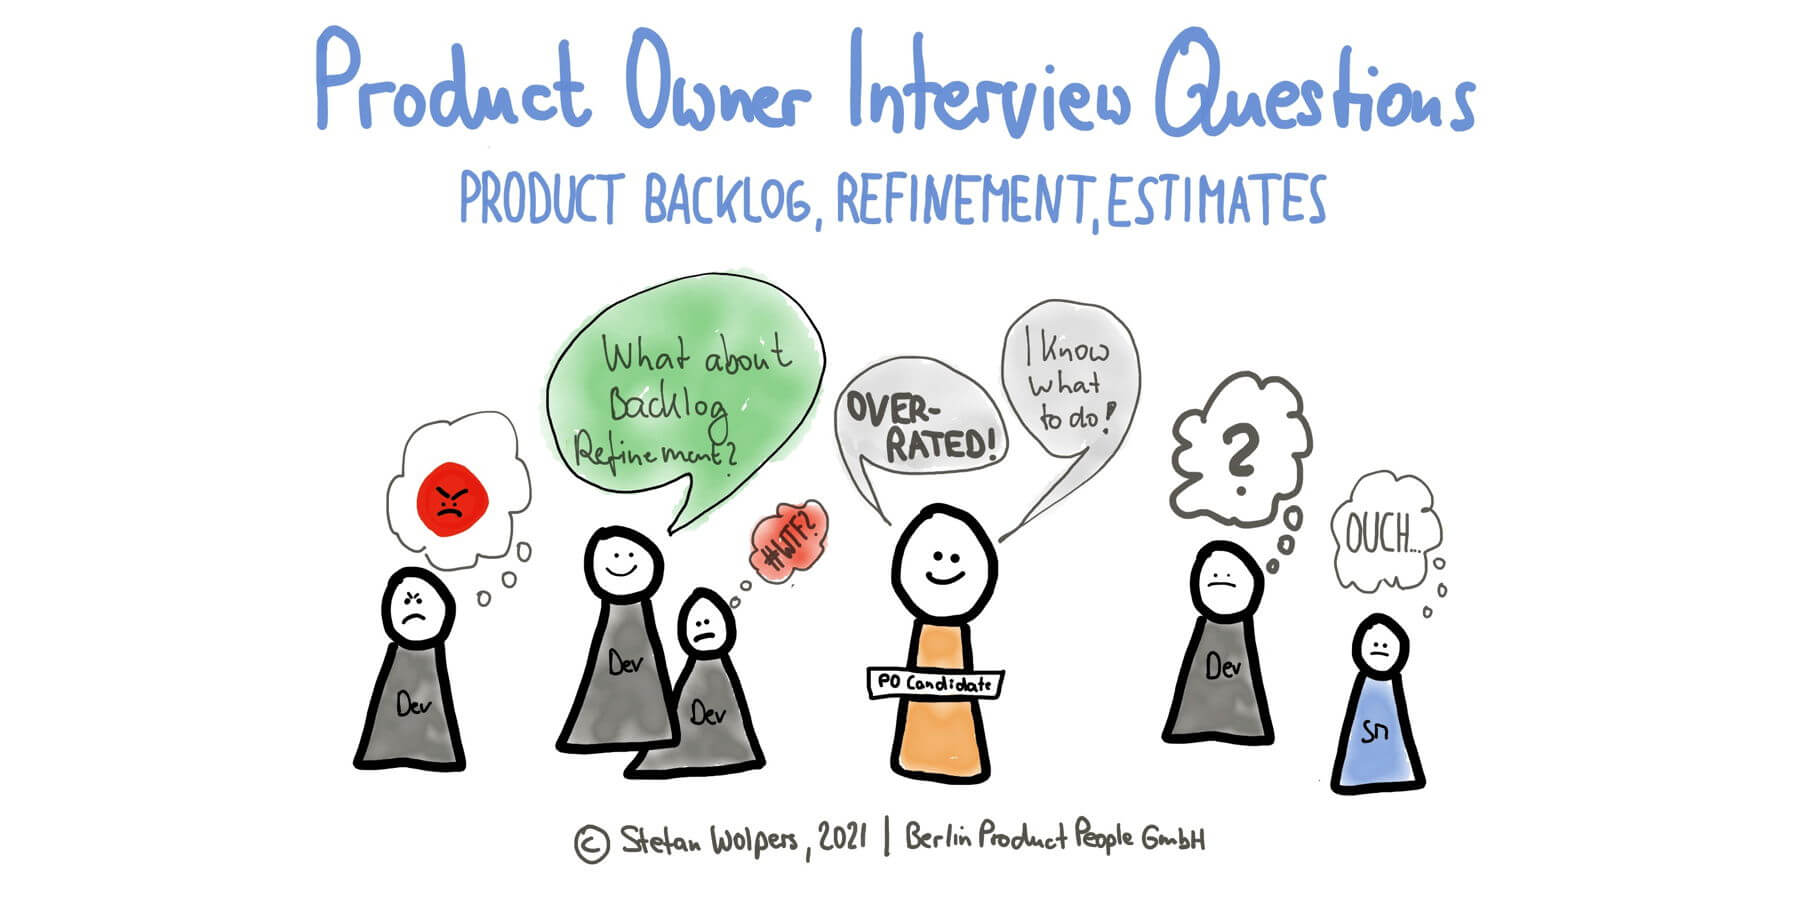 Product Owner Interview Questions — The Product Backlog and Refinement — Berlin Product People GmbH